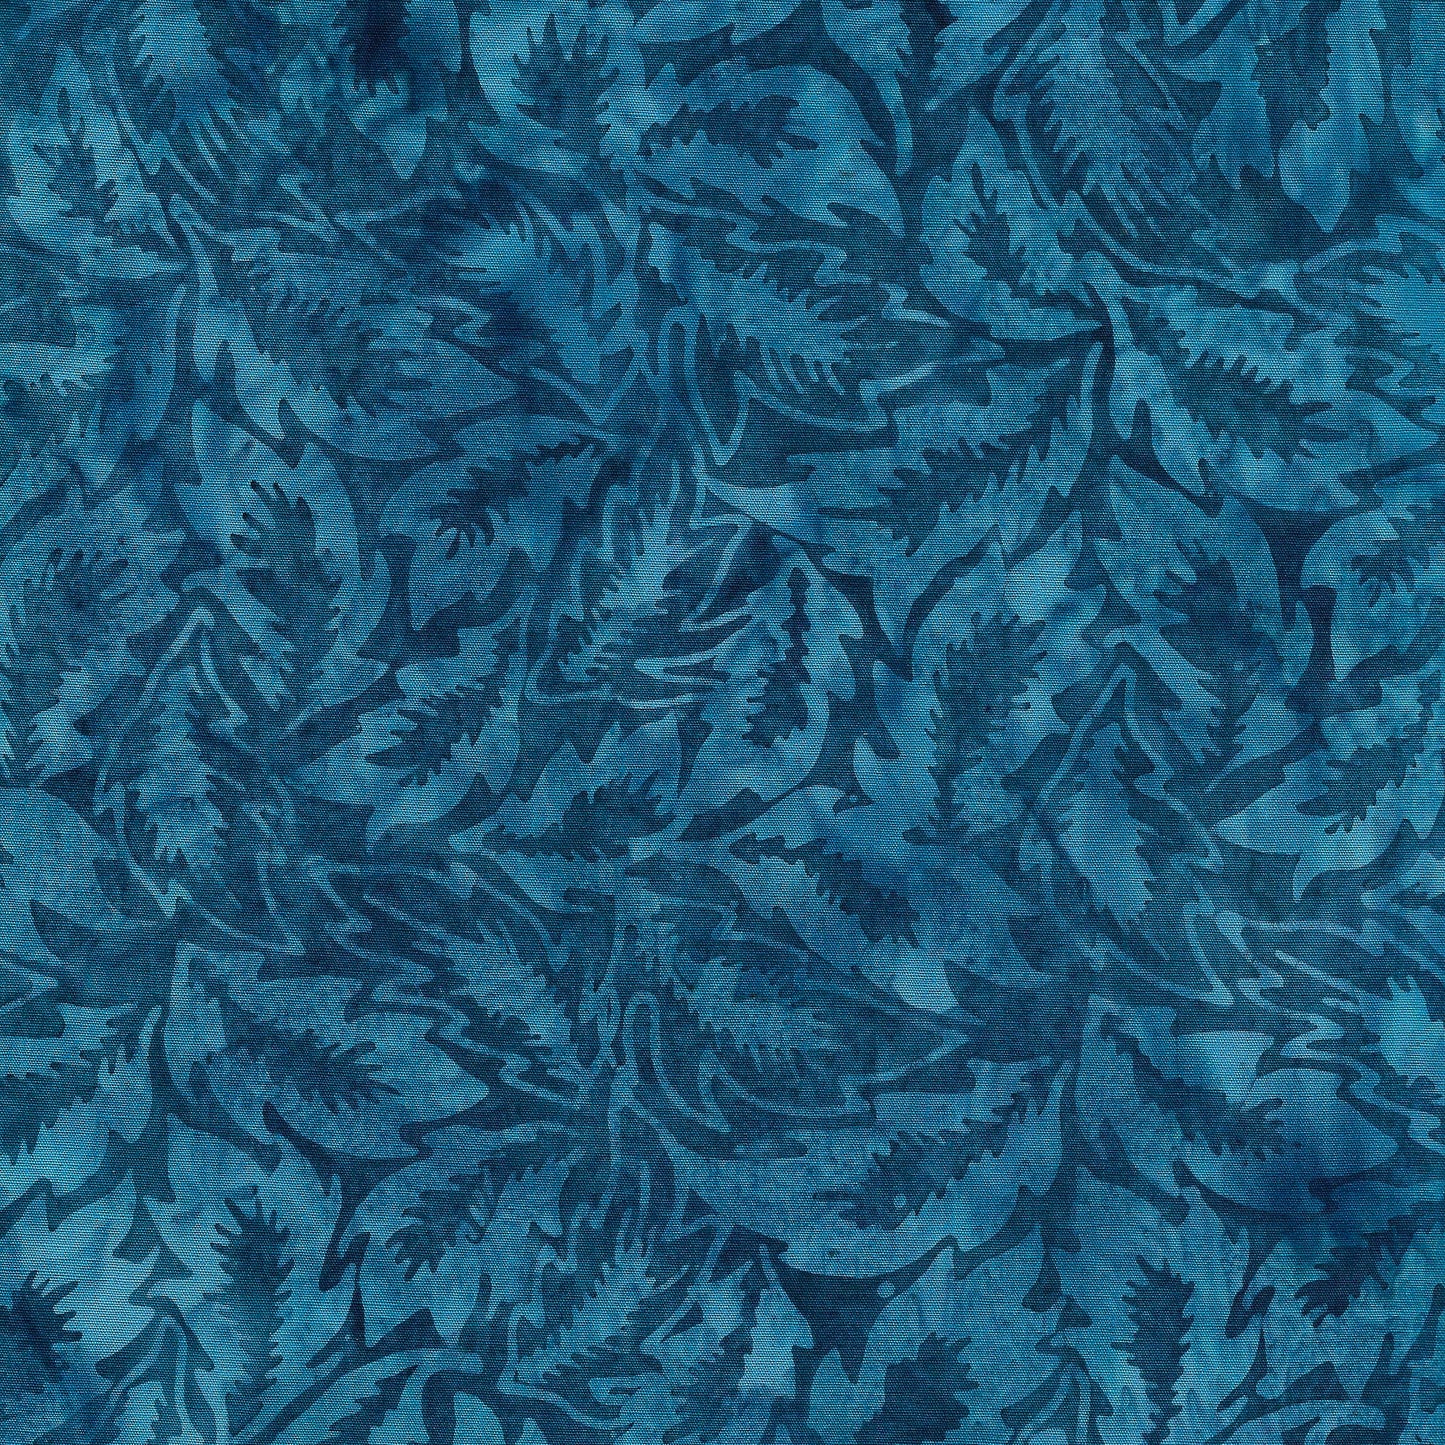 Woodcut Blossoms - Leaves - Blue